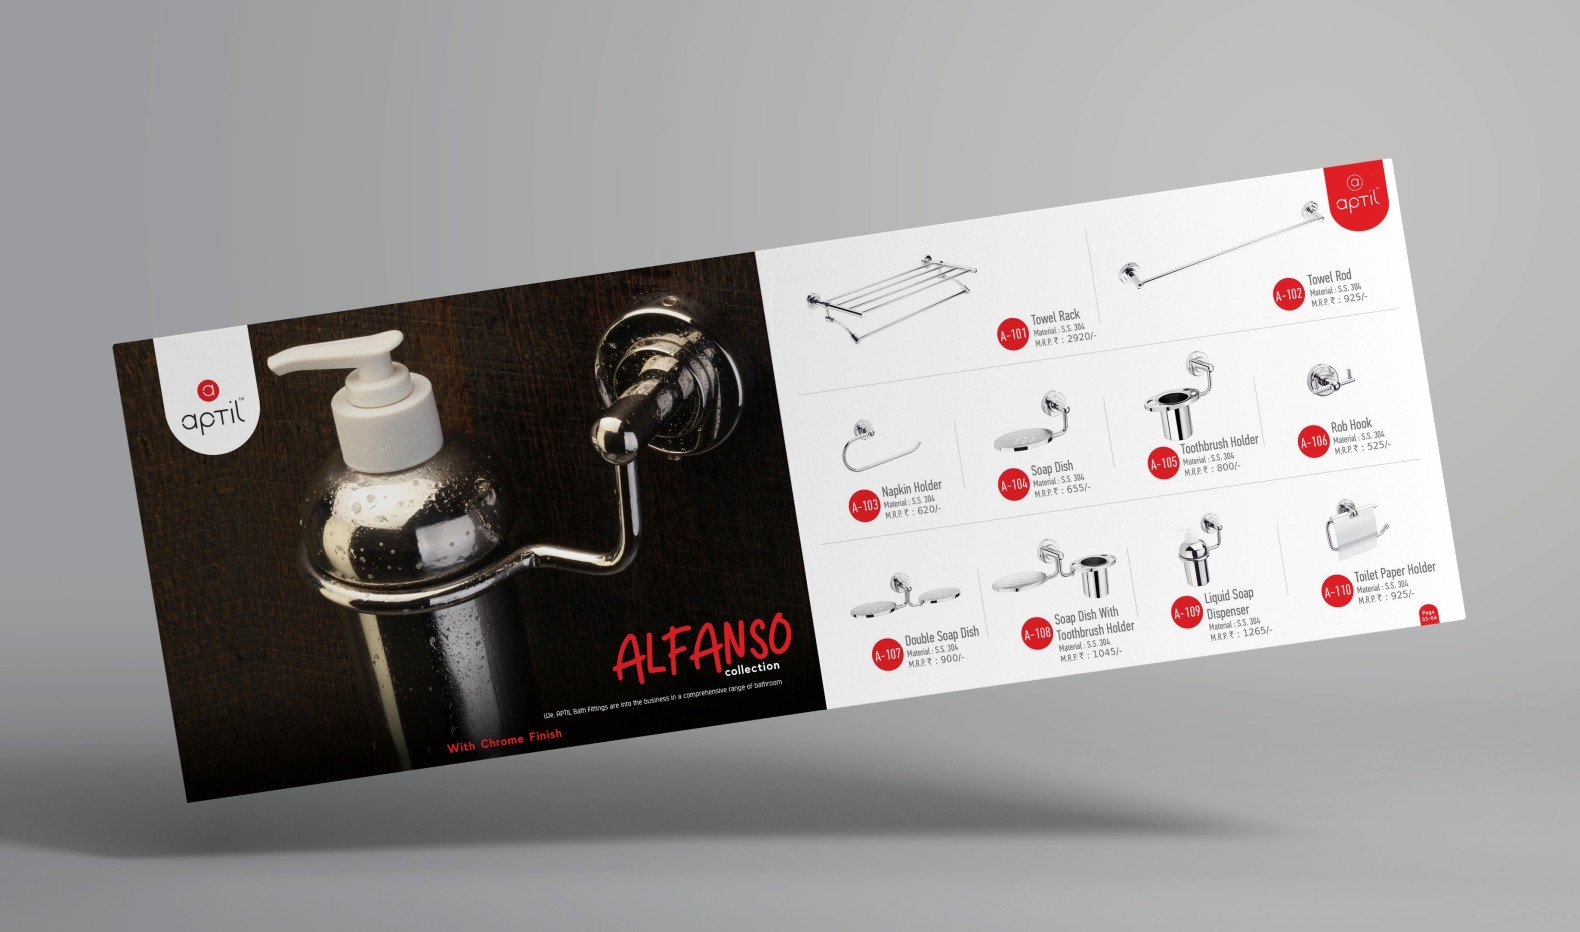 Aptil Packaging and Catalogue - Spartan Branding